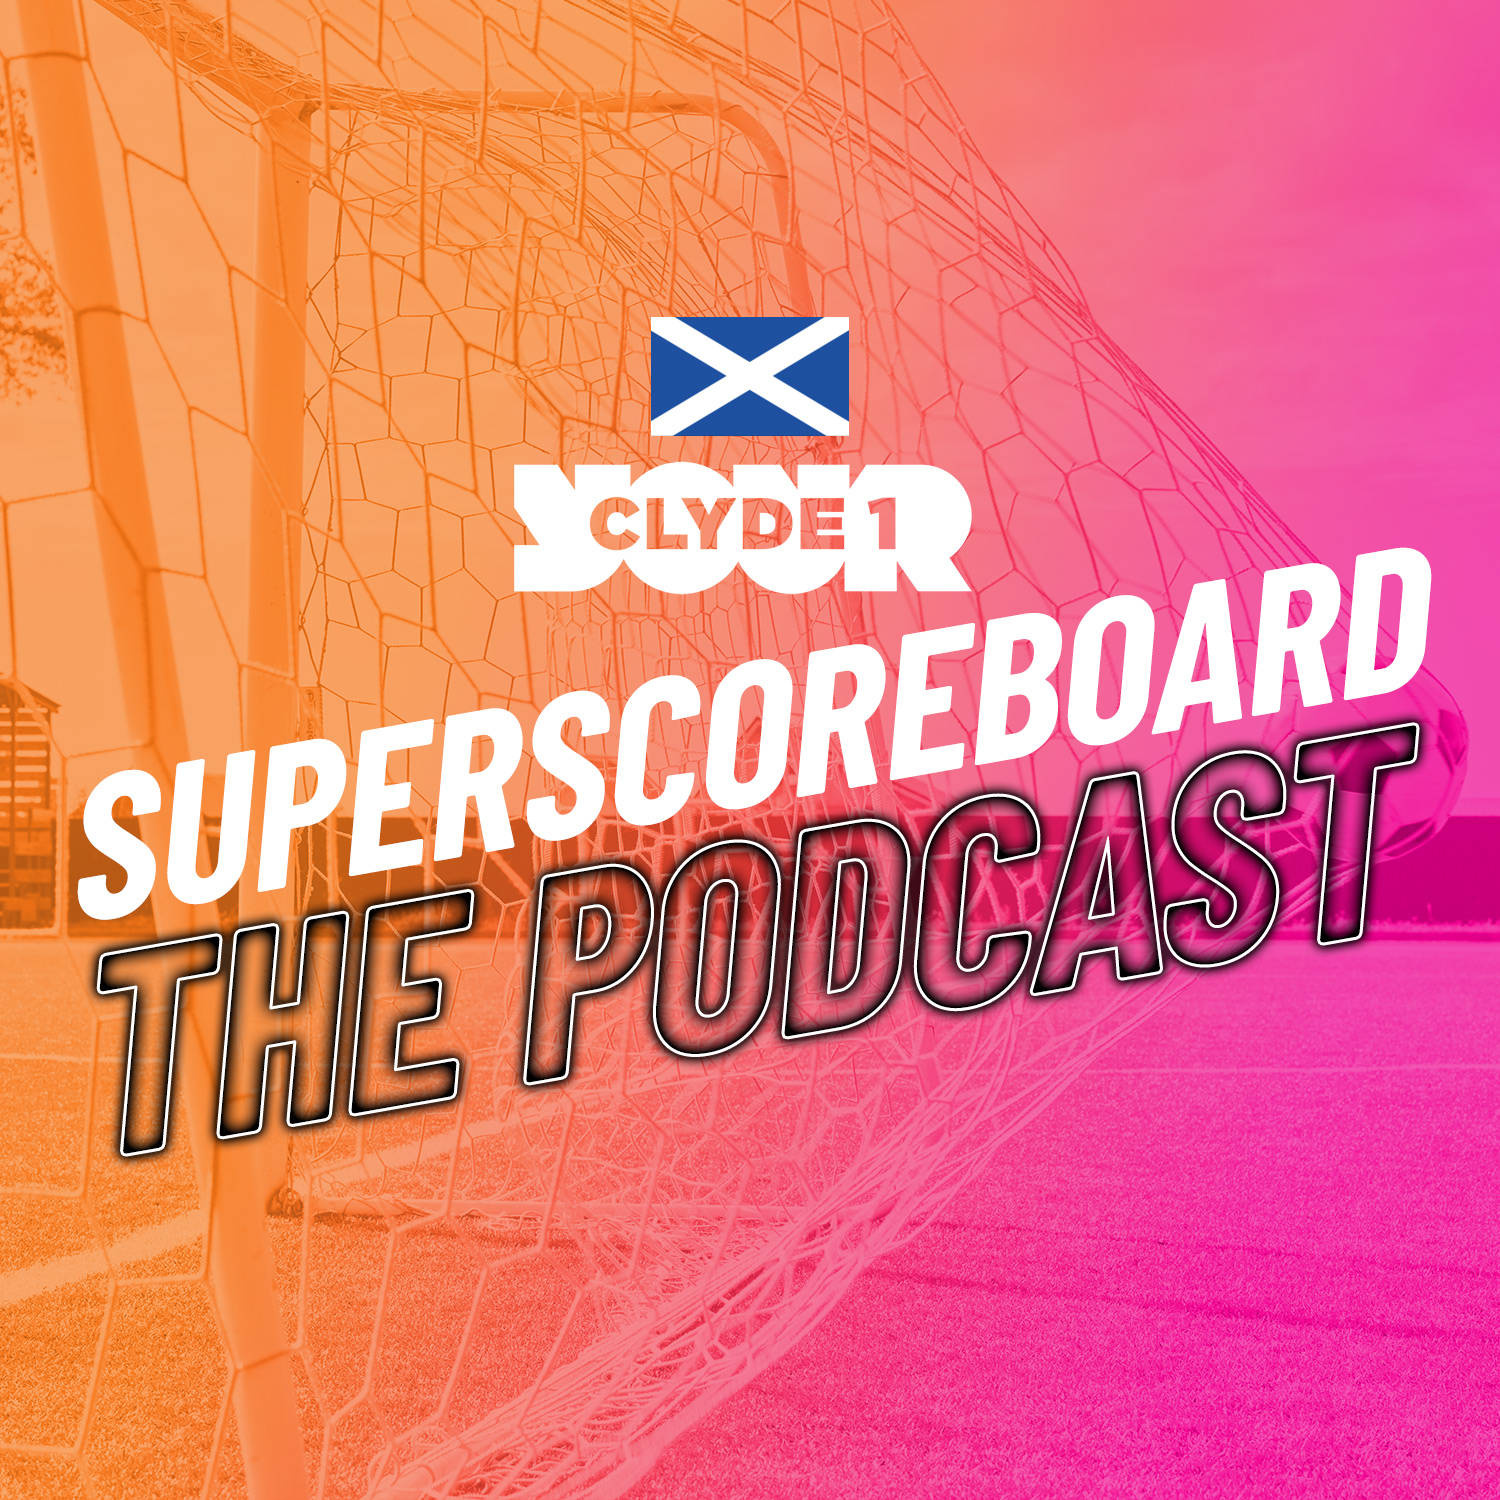 Sunday 7th April Clyde 1 Superscoreboard Part 1